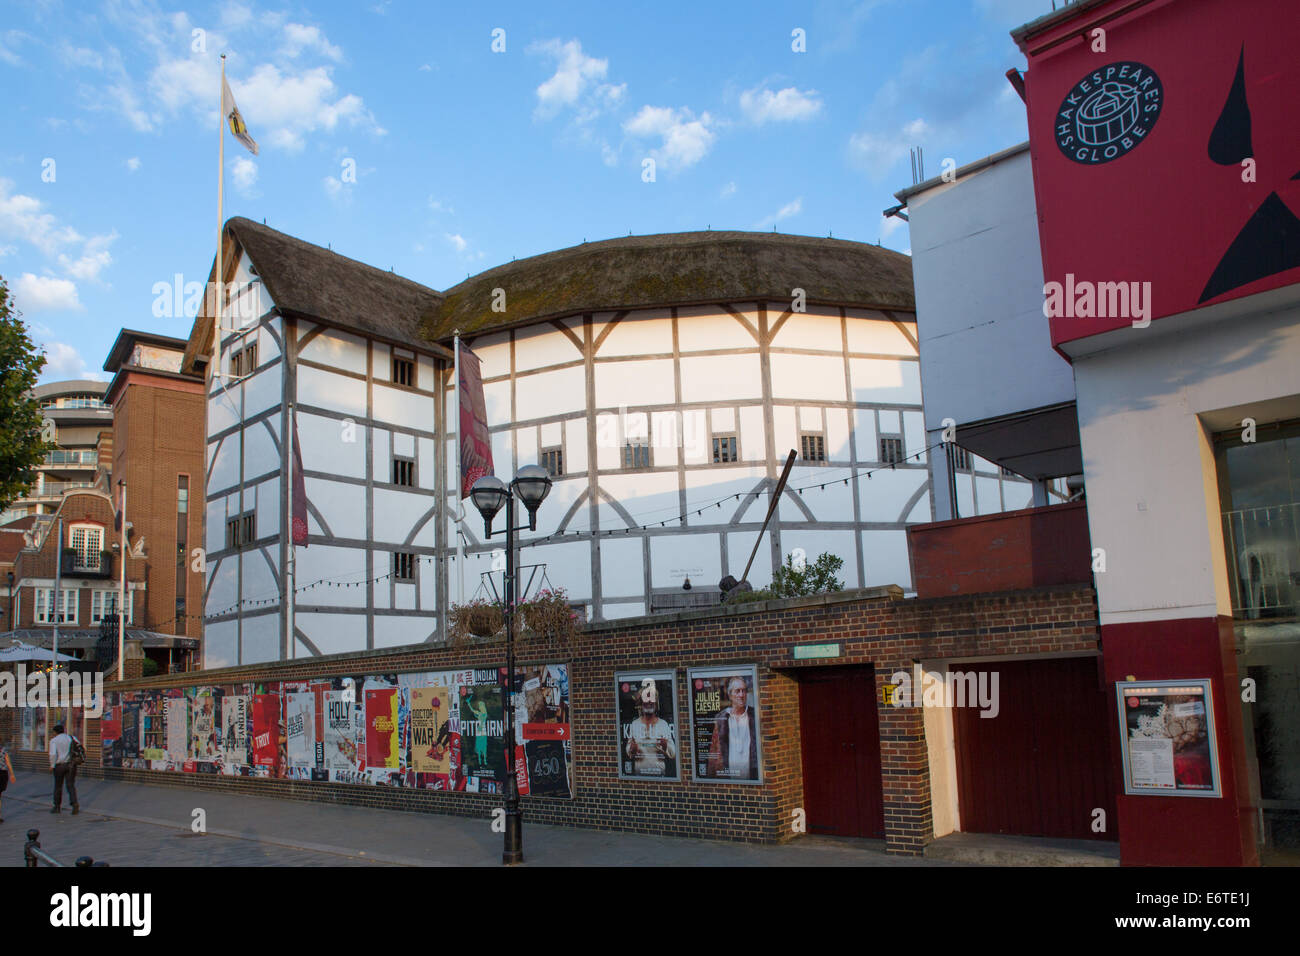 Shakespeare's Globe Theatre Banque D'Images